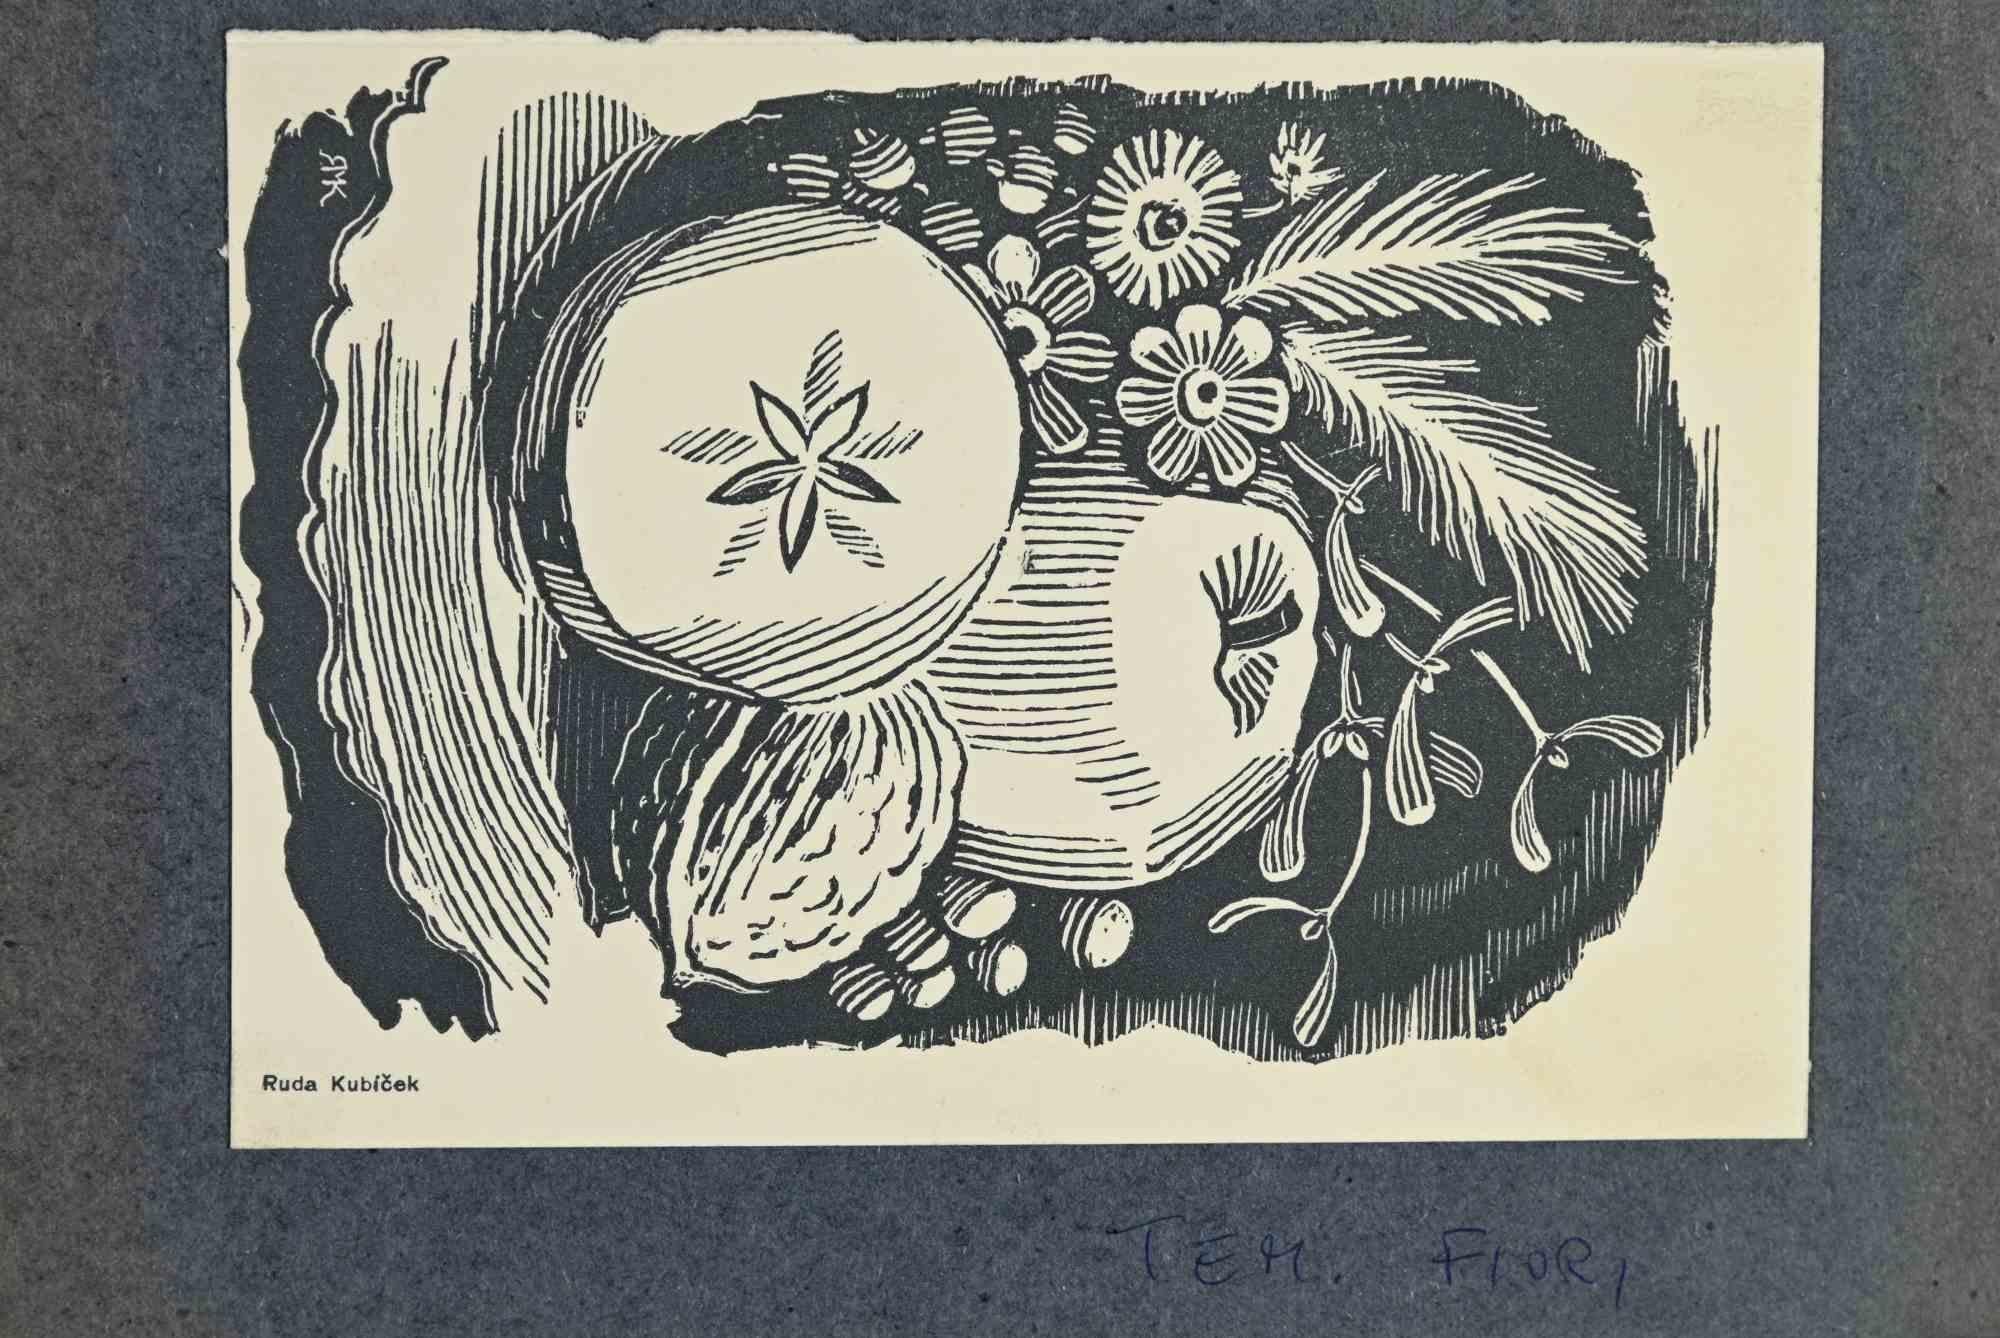 Ex Libris Still Life is an Artwork realized in 1920 s., by the Czech Artist Ruda Kubicek (1891-1983)

Woodcut B./W. print on paper. Signed on plate on the left corner. 

The work is glued on black cardboard.

Total dimensions: 13.5 x 20 cm.

Good